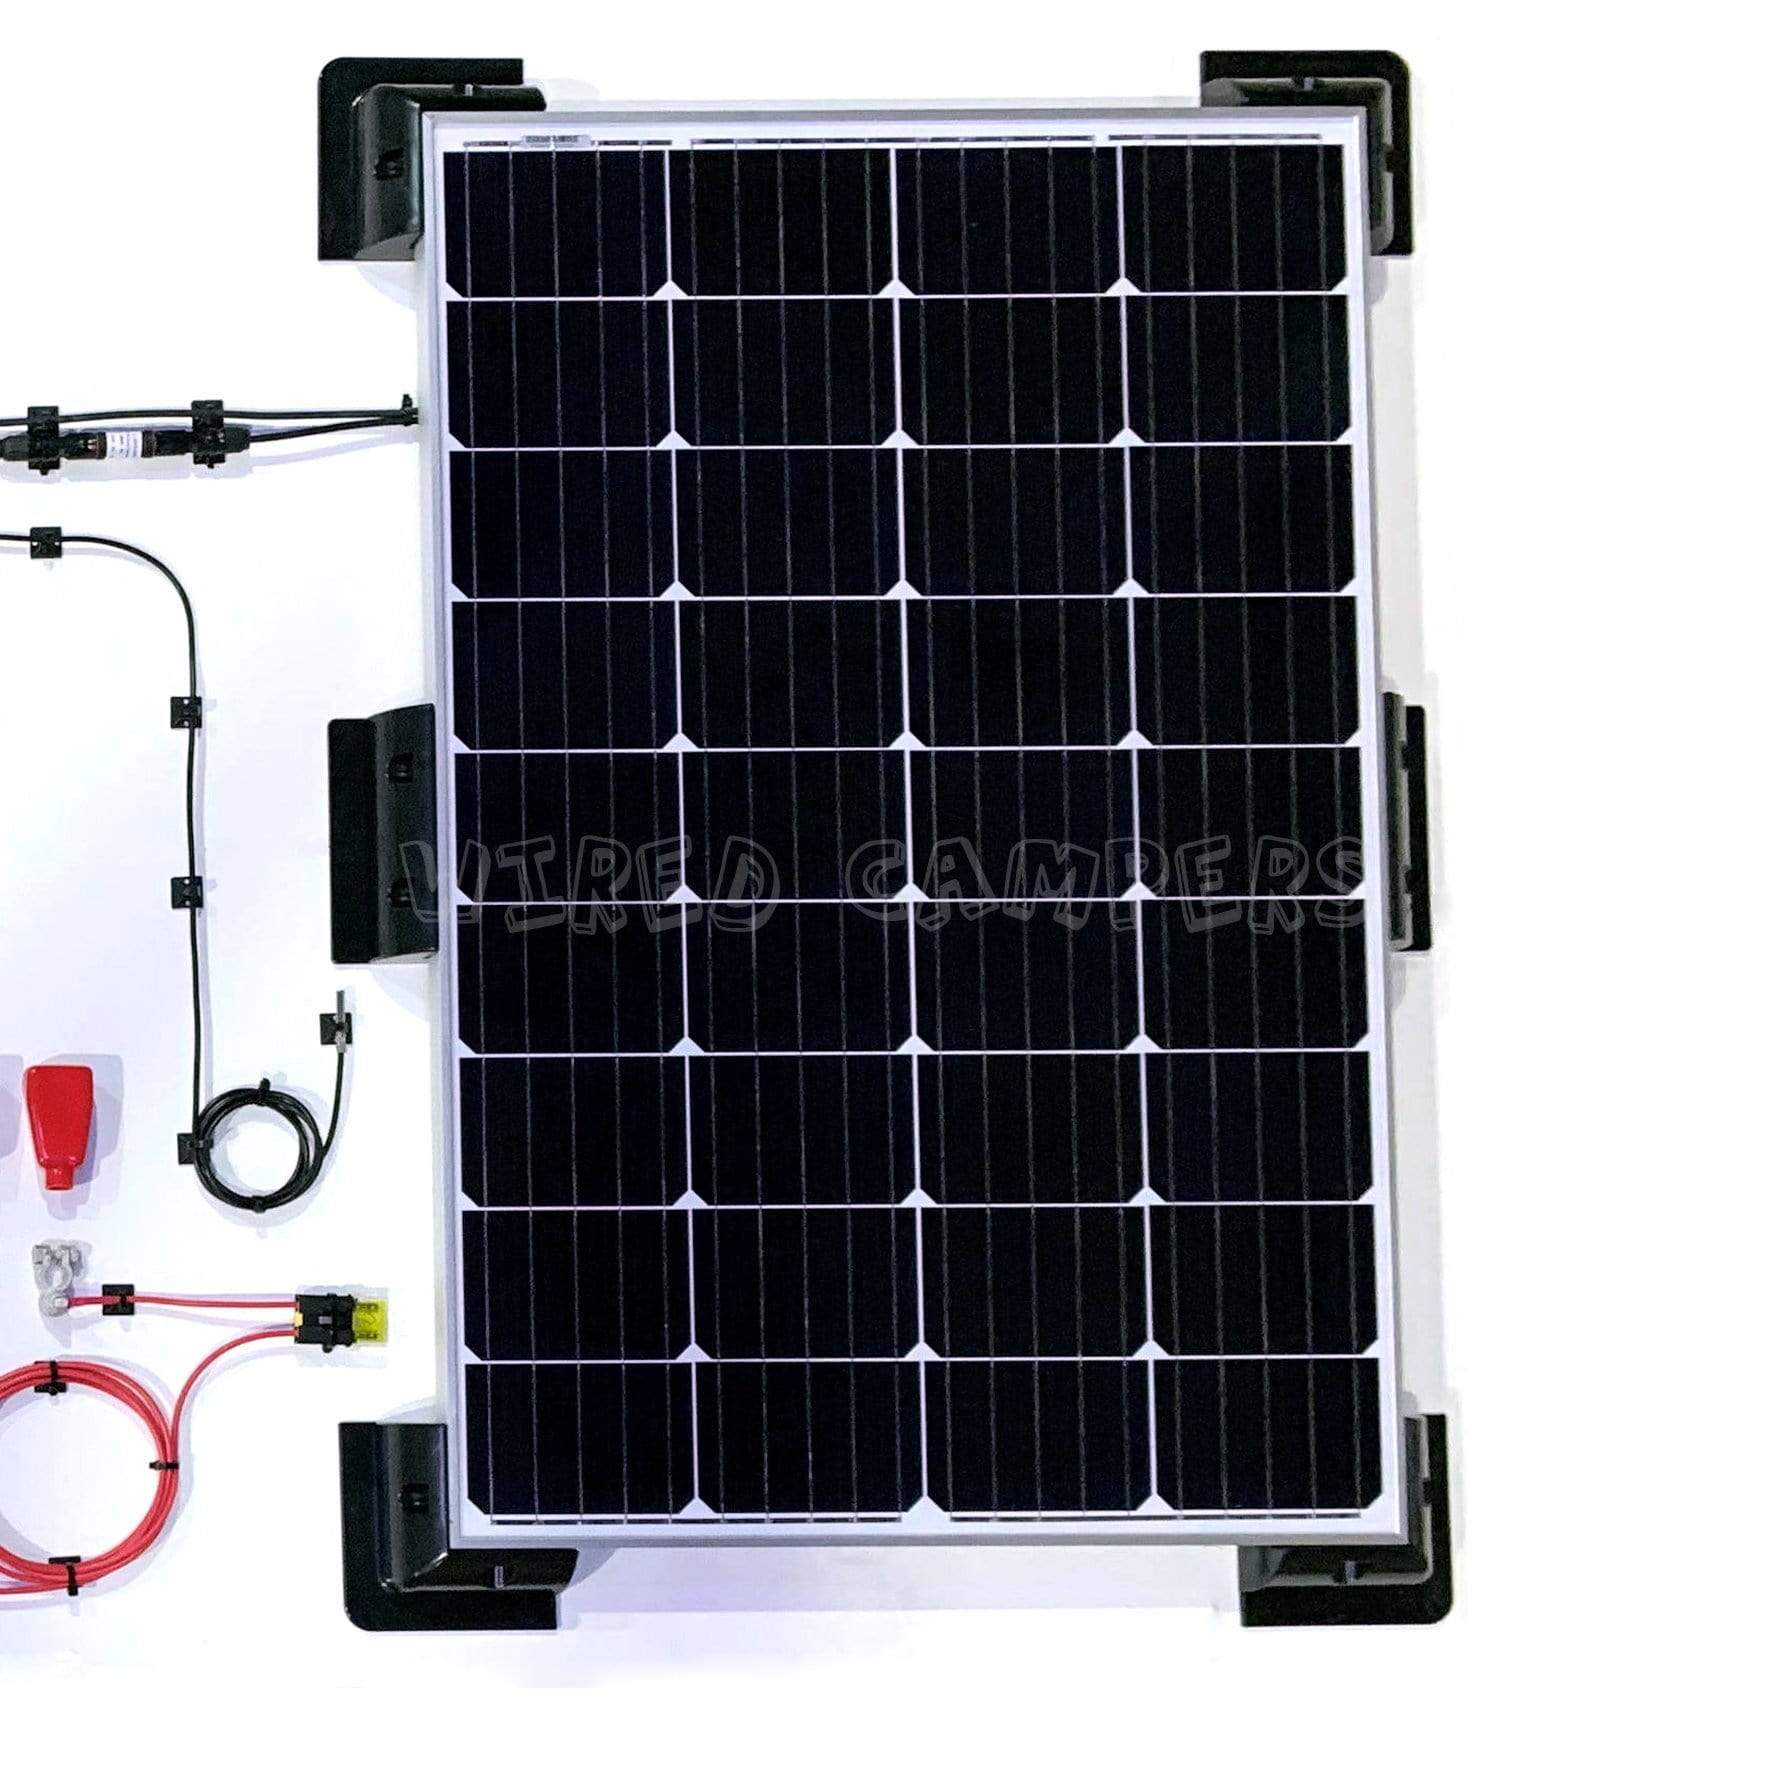 Wired Campers Limited Complete 320W Dual Solar Panel MPPT Camper Van Kit With Control Panel